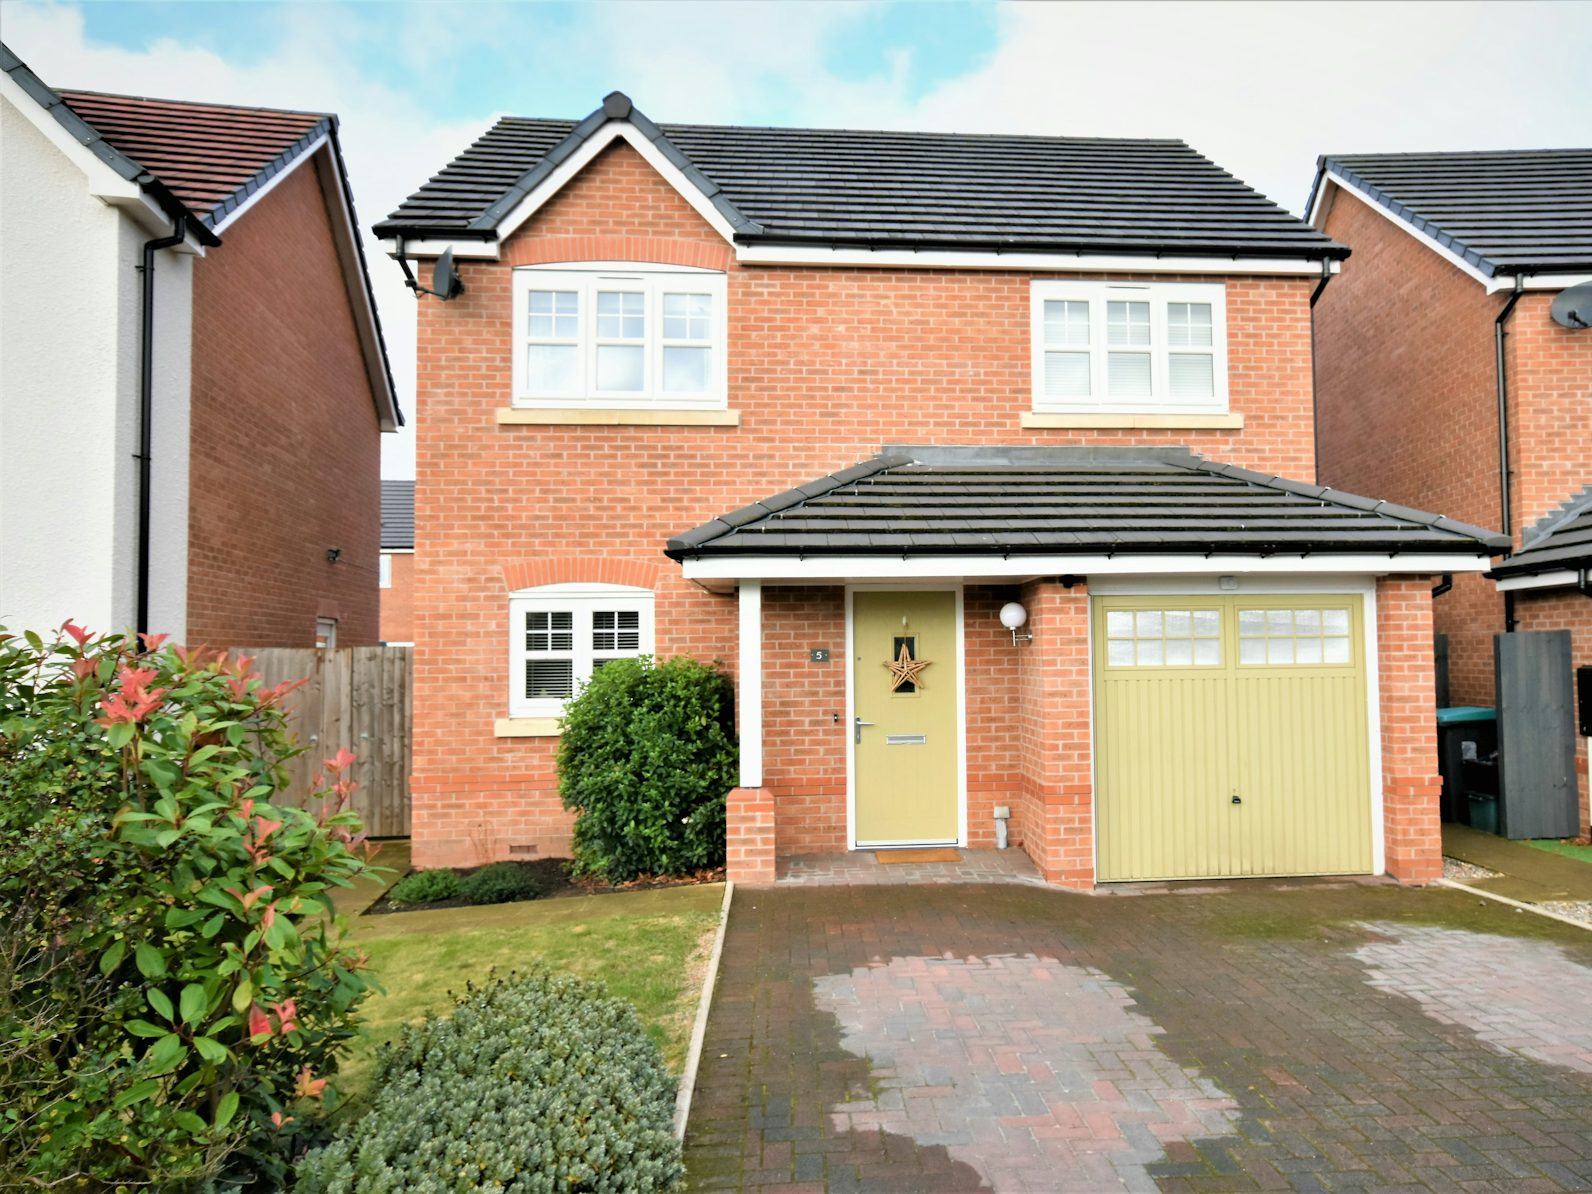 Detached House for sale on Llys Y Groes Wrexham, LL13